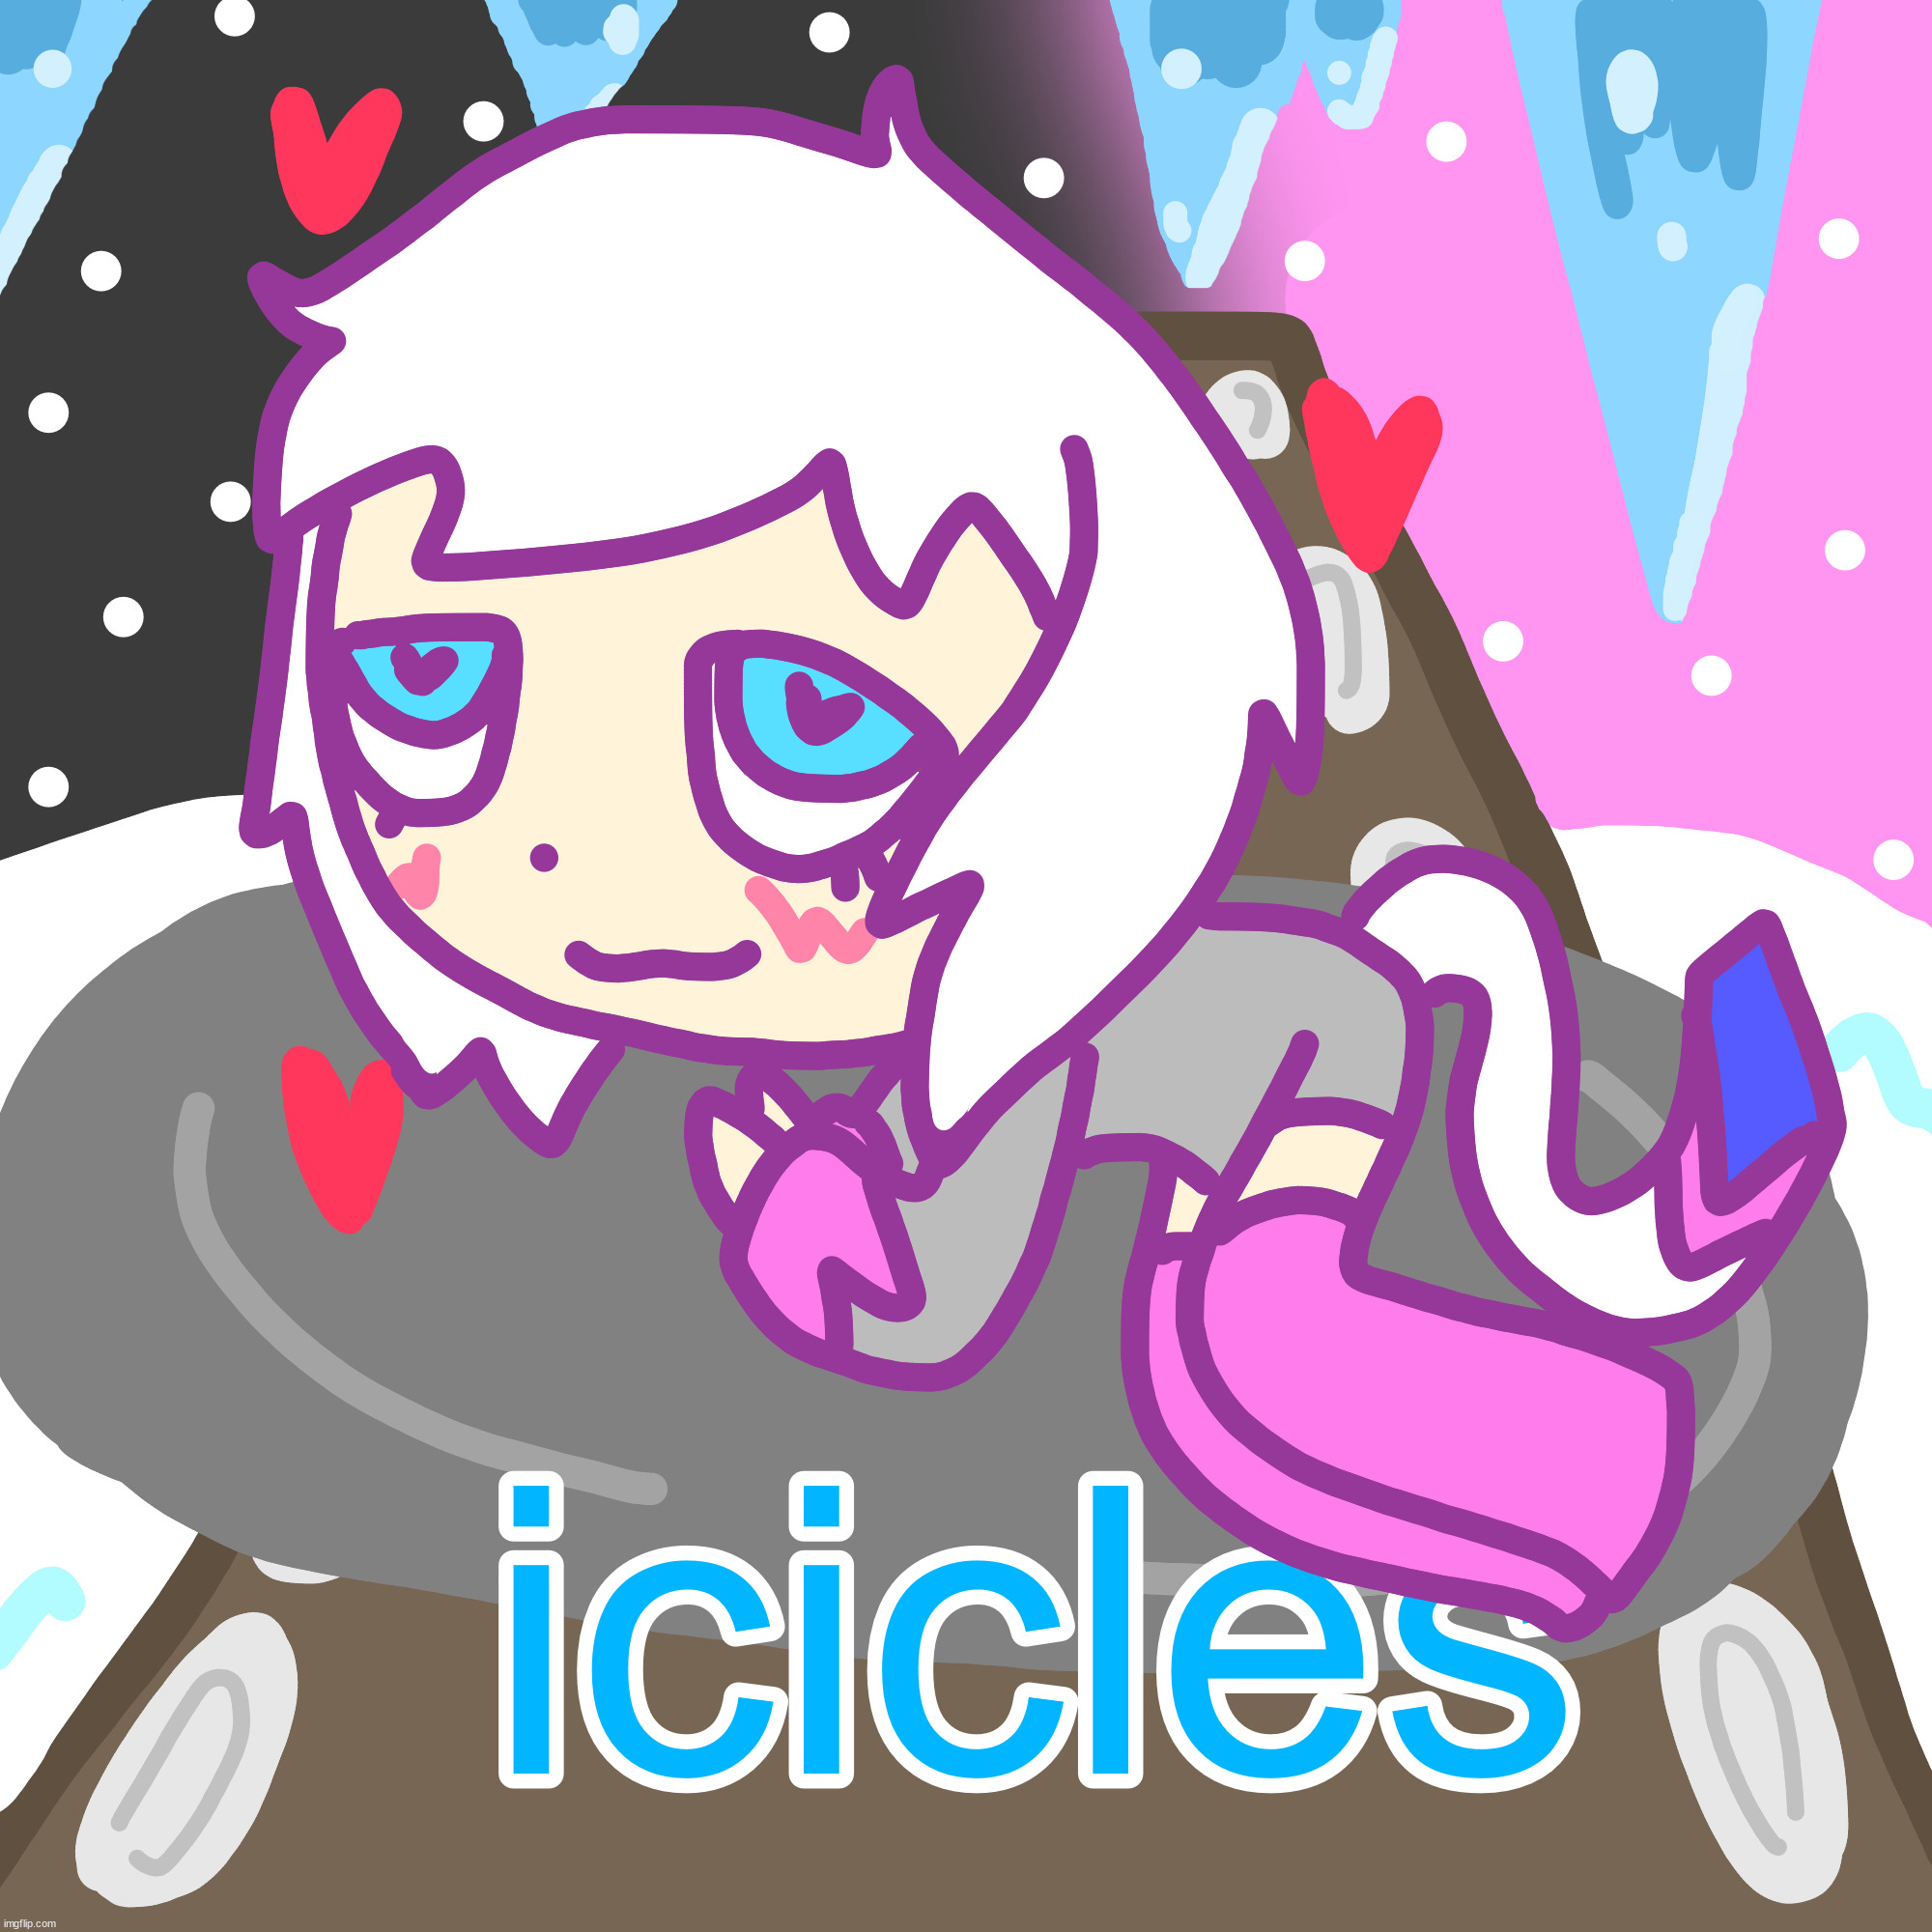 The Scary Jokes - Icicles (https://www.youtube.com/watch?v=nNUjCuywl3Y) | made w/ Imgflip meme maker